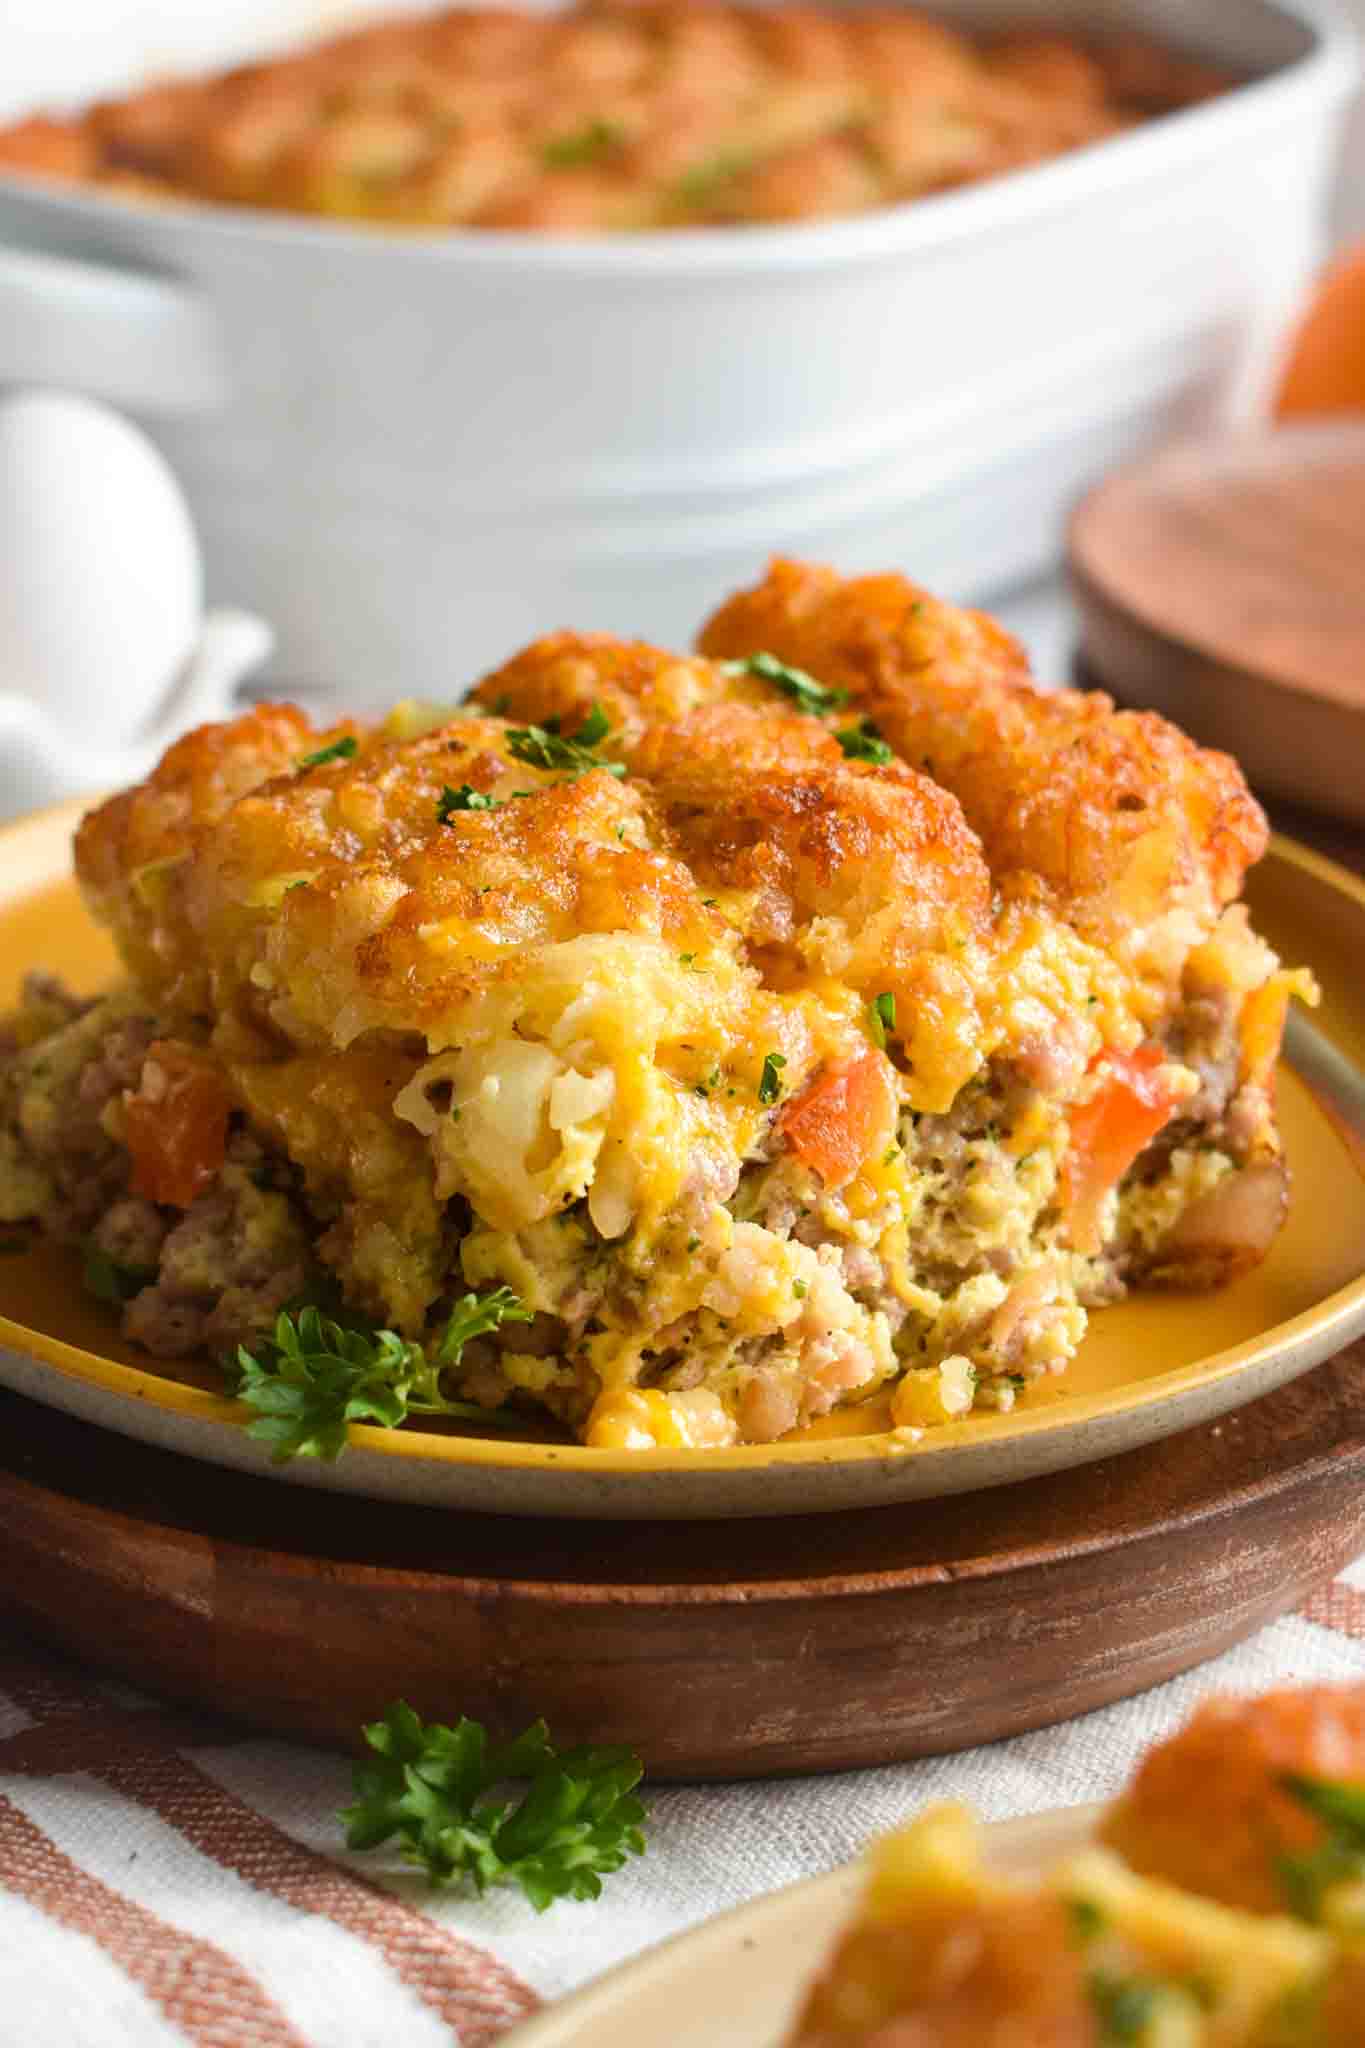 Breakfast Tater Tot Casserole with Pork Sausage